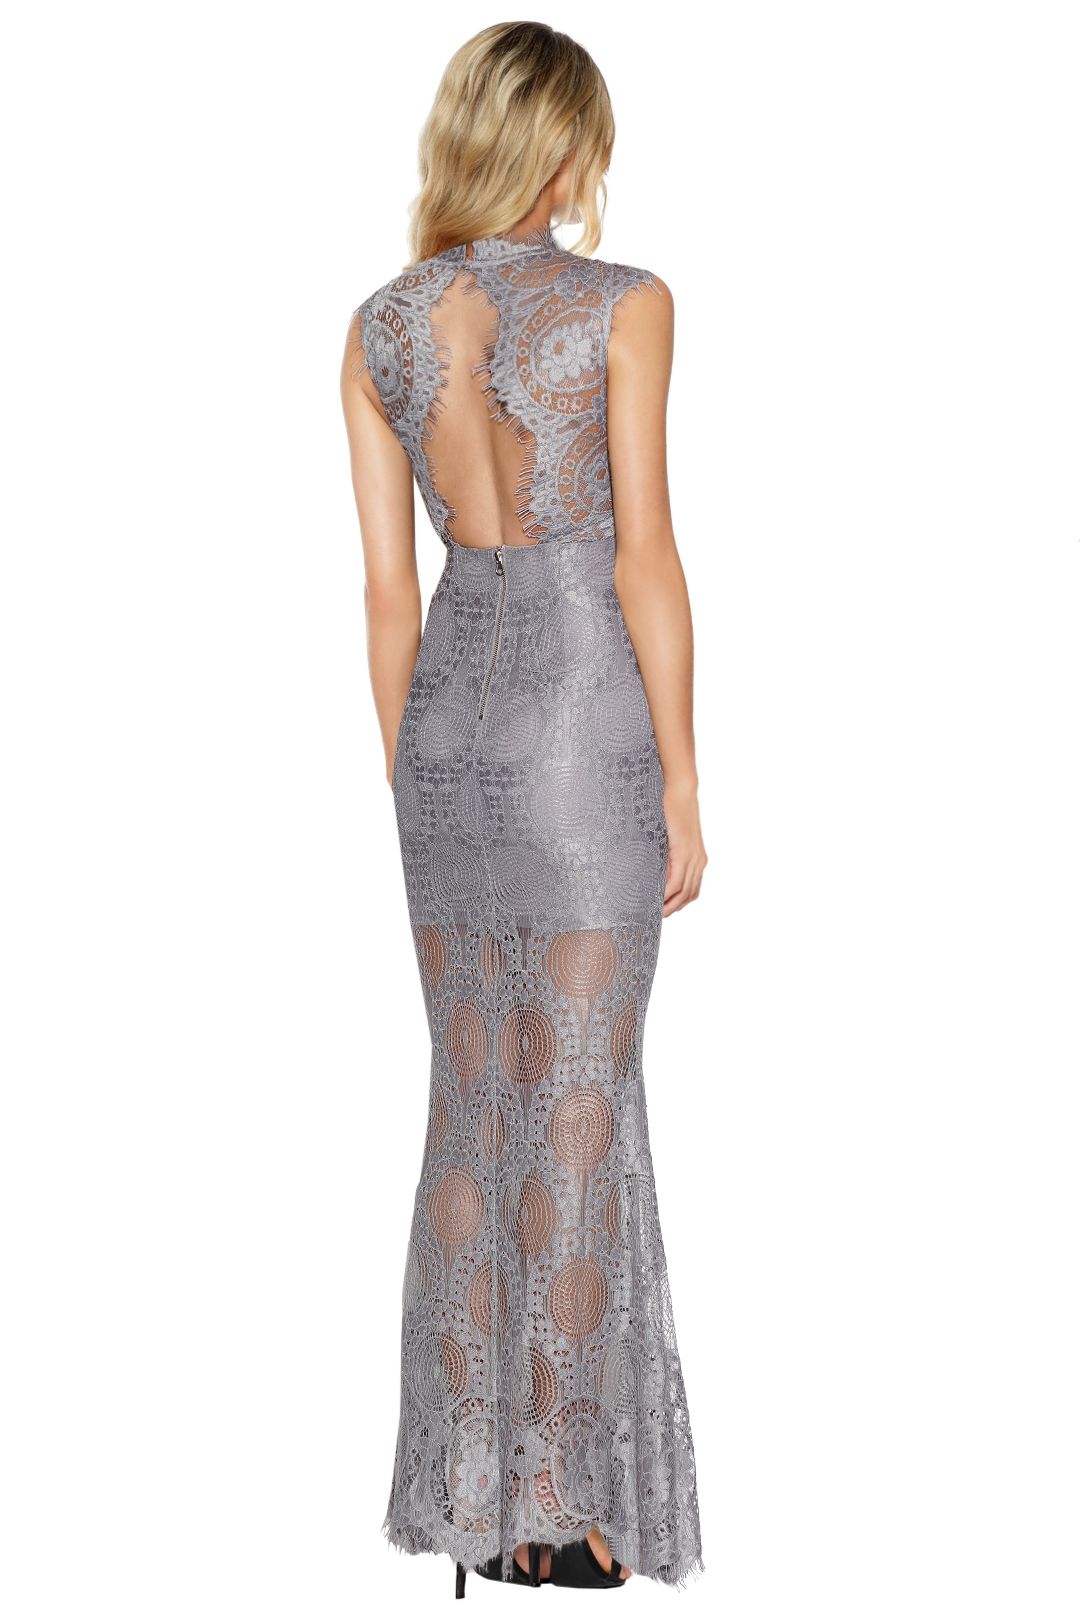 Grace and Hart - Queen Bee Gown - Grey - Back